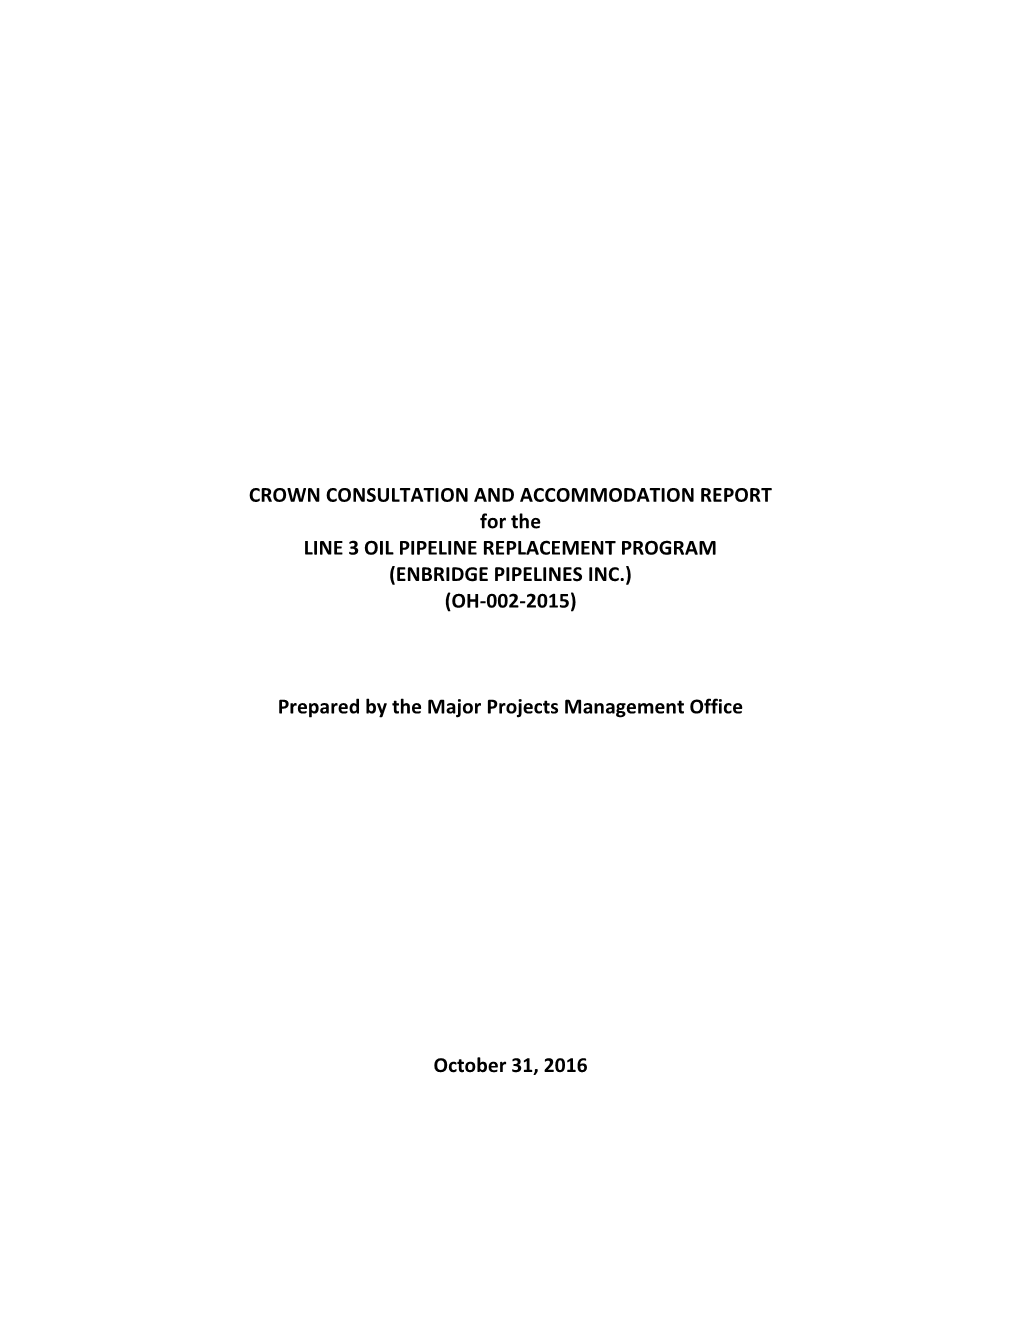 Crown Consultations and Accommodation Report